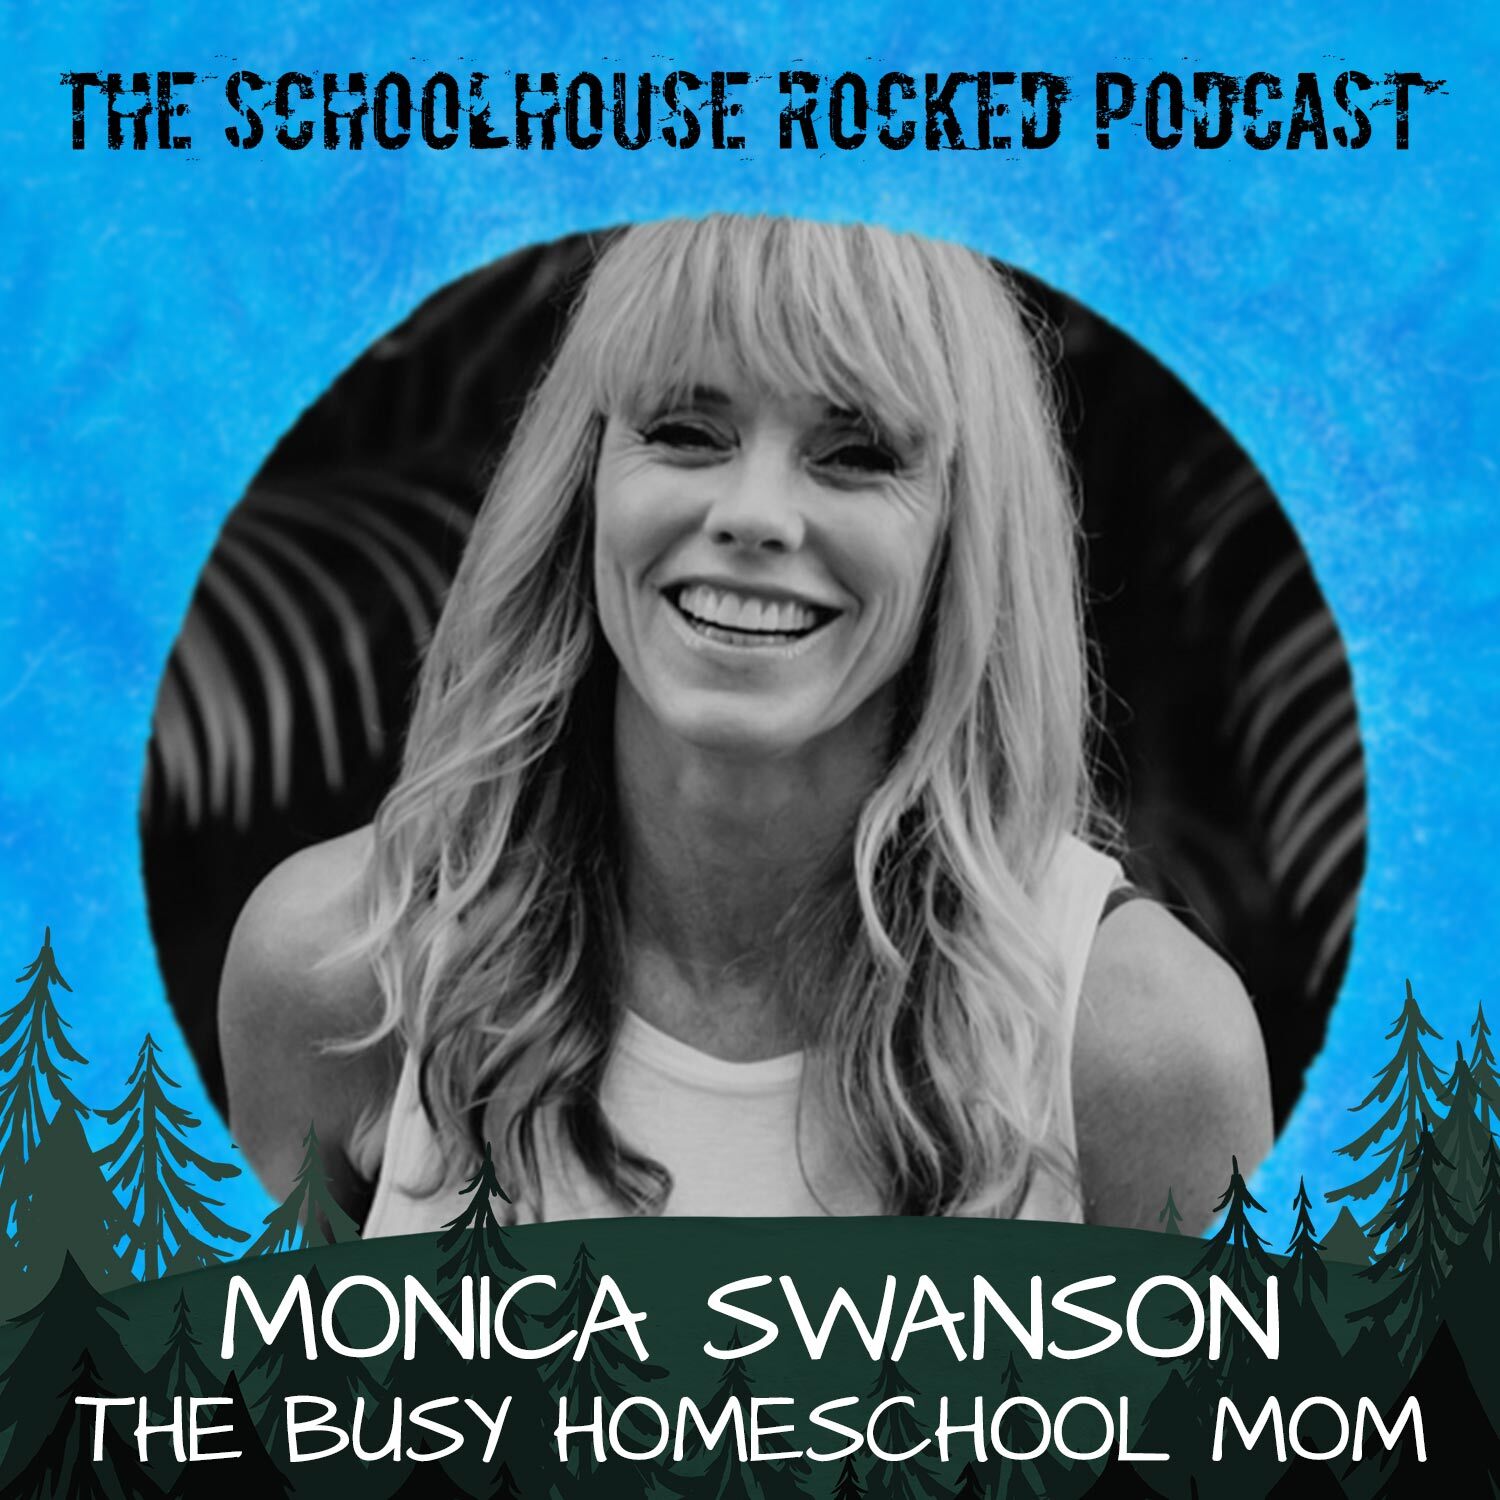 Hope for the busy homeschool mom - interview with Monica Swanson